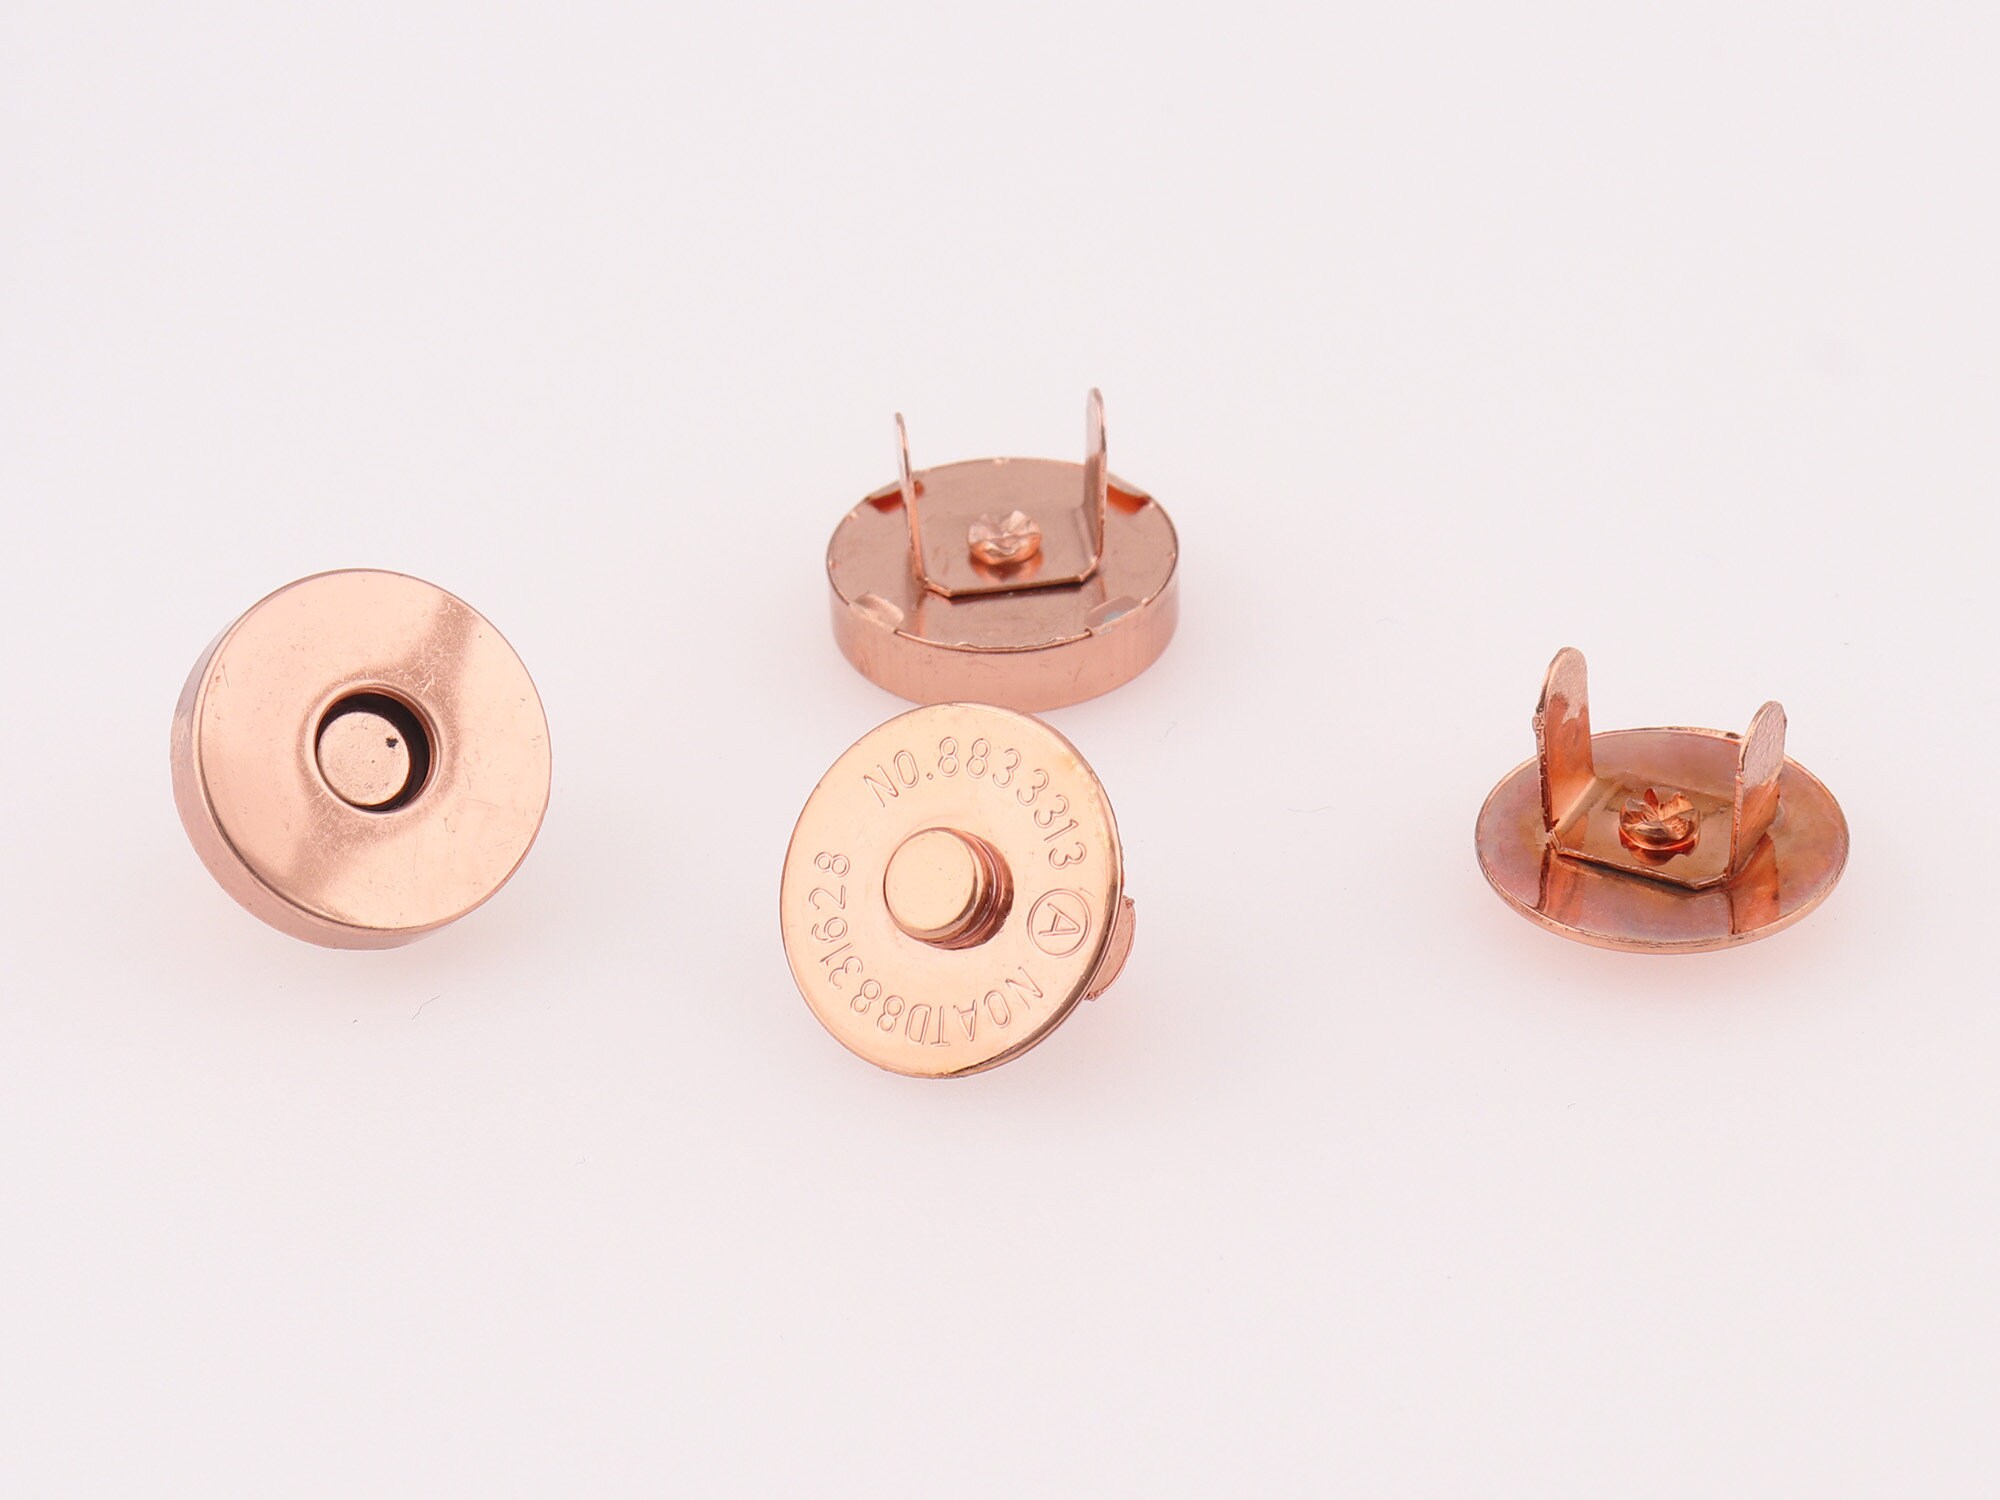 50 Sets 10mm Snap Fastener Rose Gold Snap Buttons Clothing Button Coat Snap  Button Sewing Fastener Purse Leather Craft 